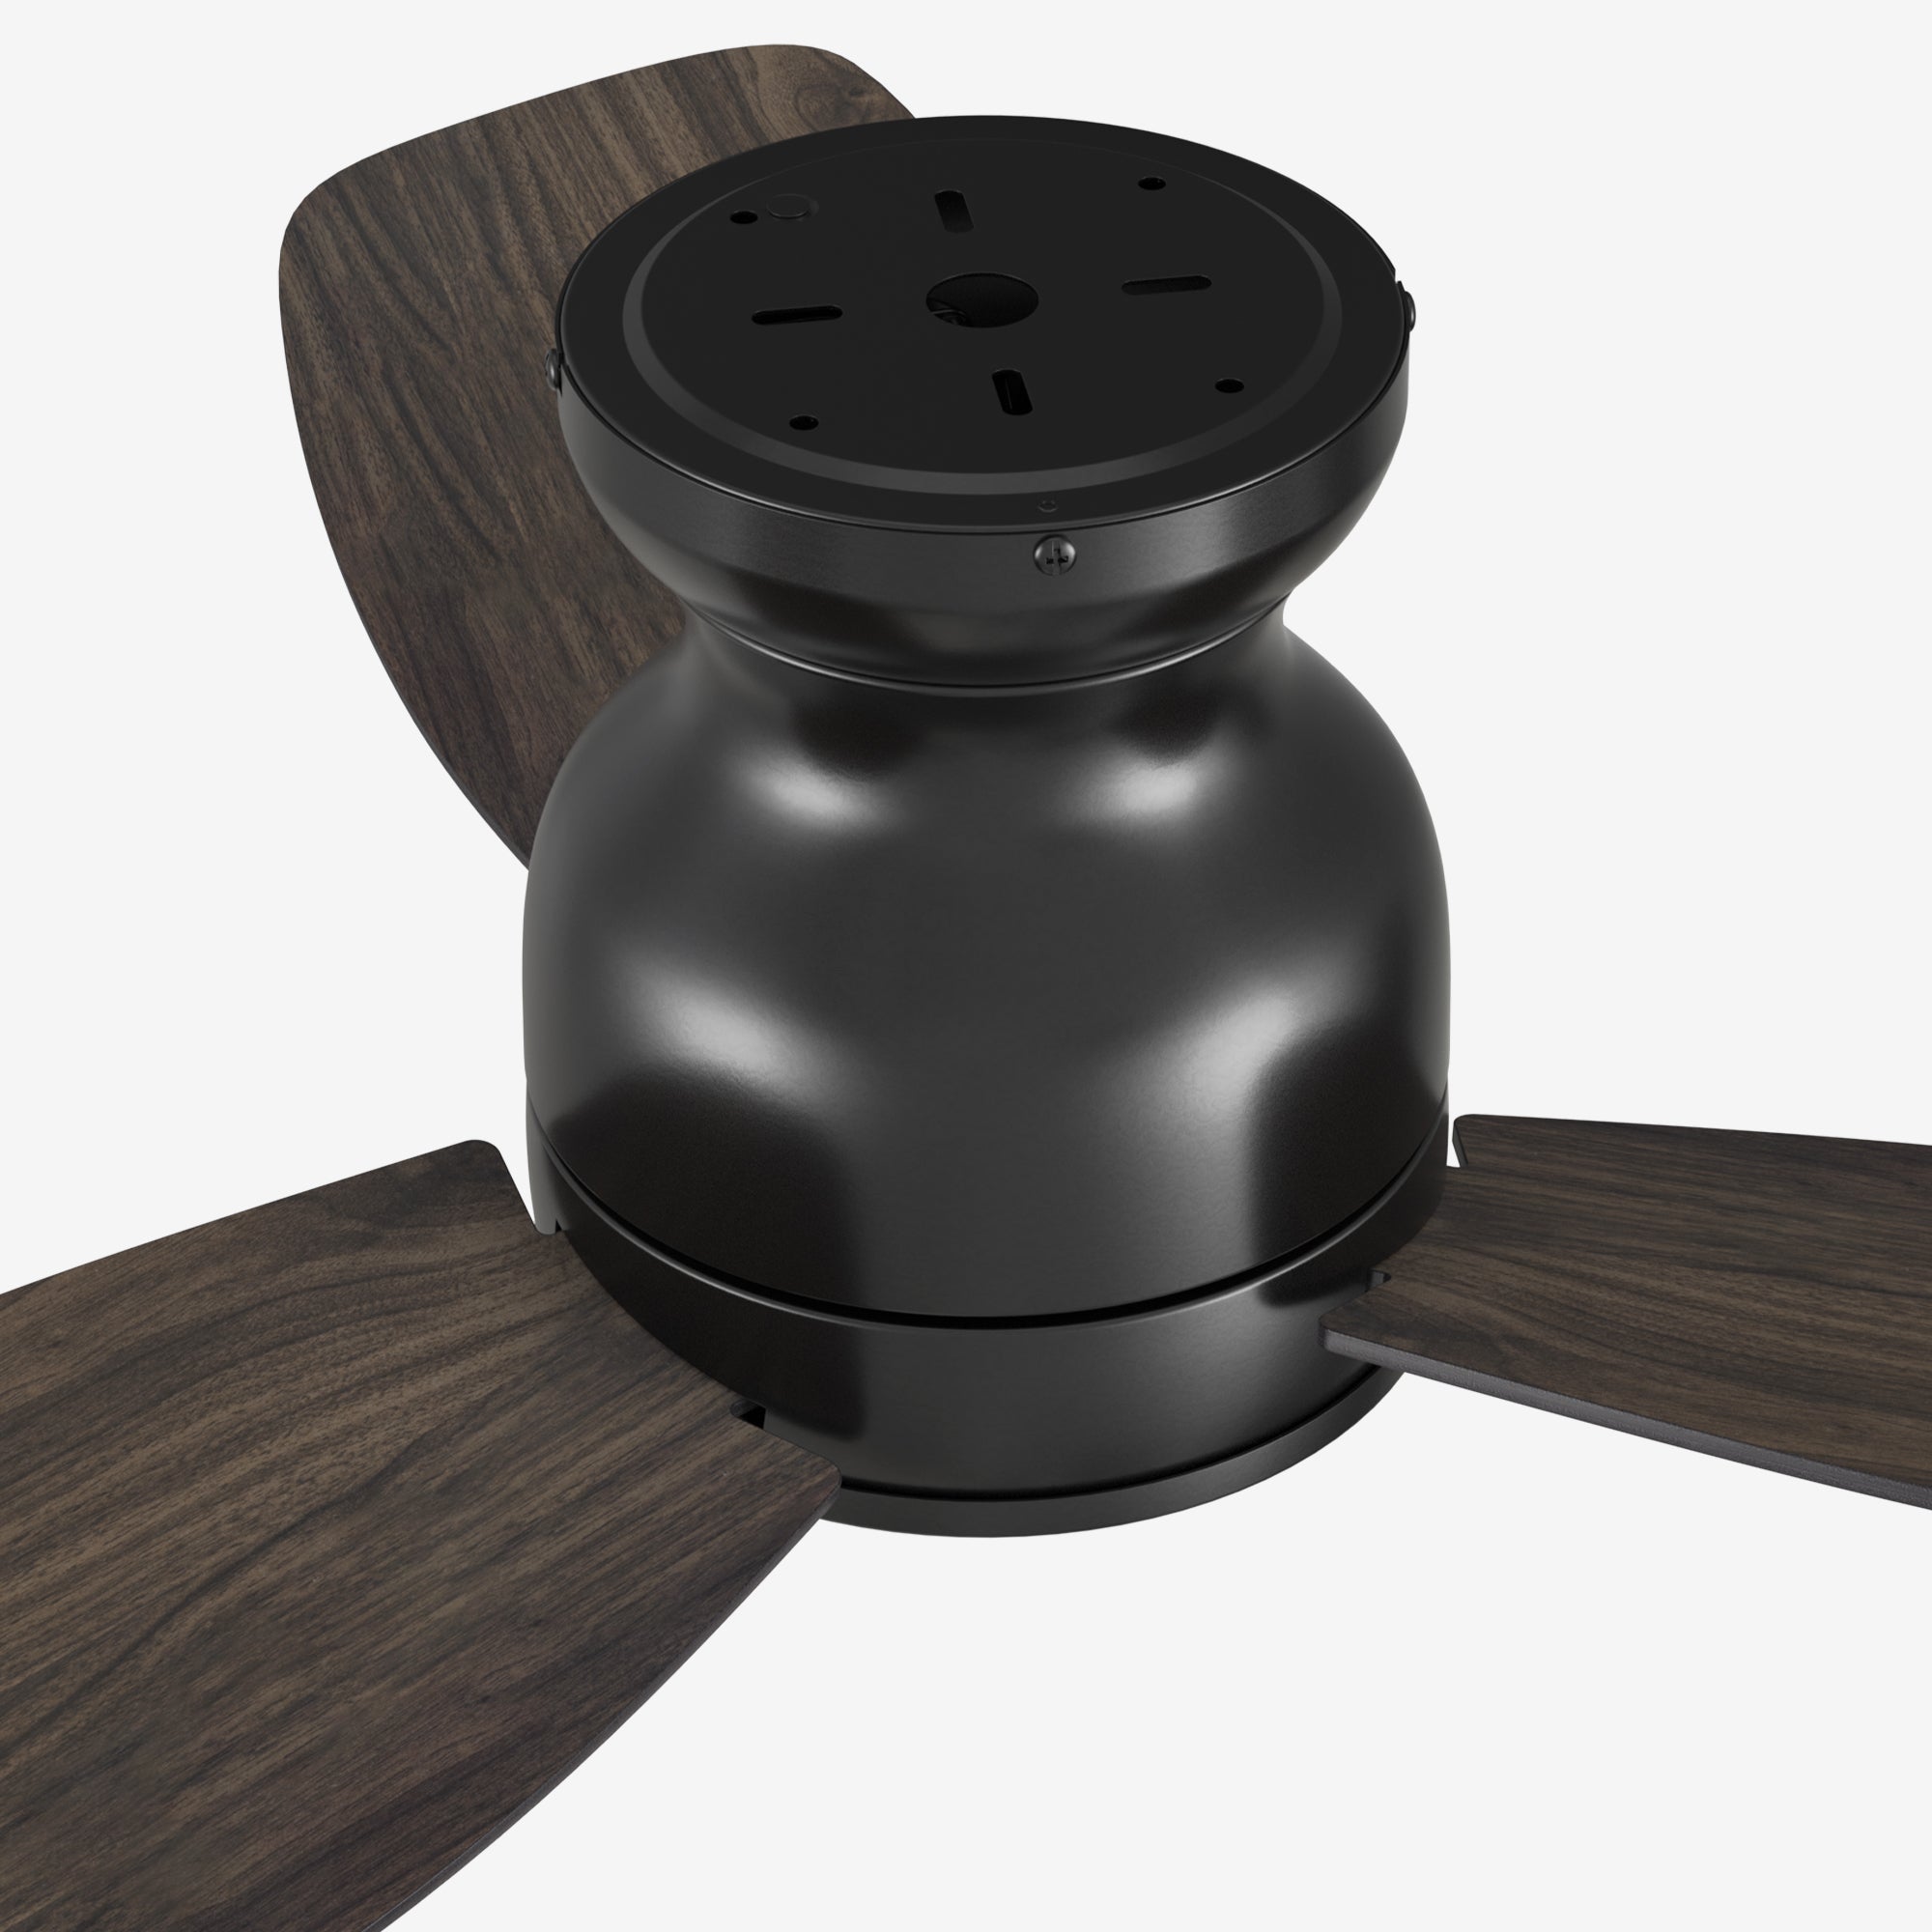 Enjoy a cooling breeze and relaxing controling in an elegant space with the Smafan Osborn 44 inch indoor ceiling fan. The fan is equipped with the latest motor and controling technology with a stylish exterior to suit the décor of your preference. The fan features a charming wood / white finish and sleek blades to cooling up your indoor living spaces. #color_Wood